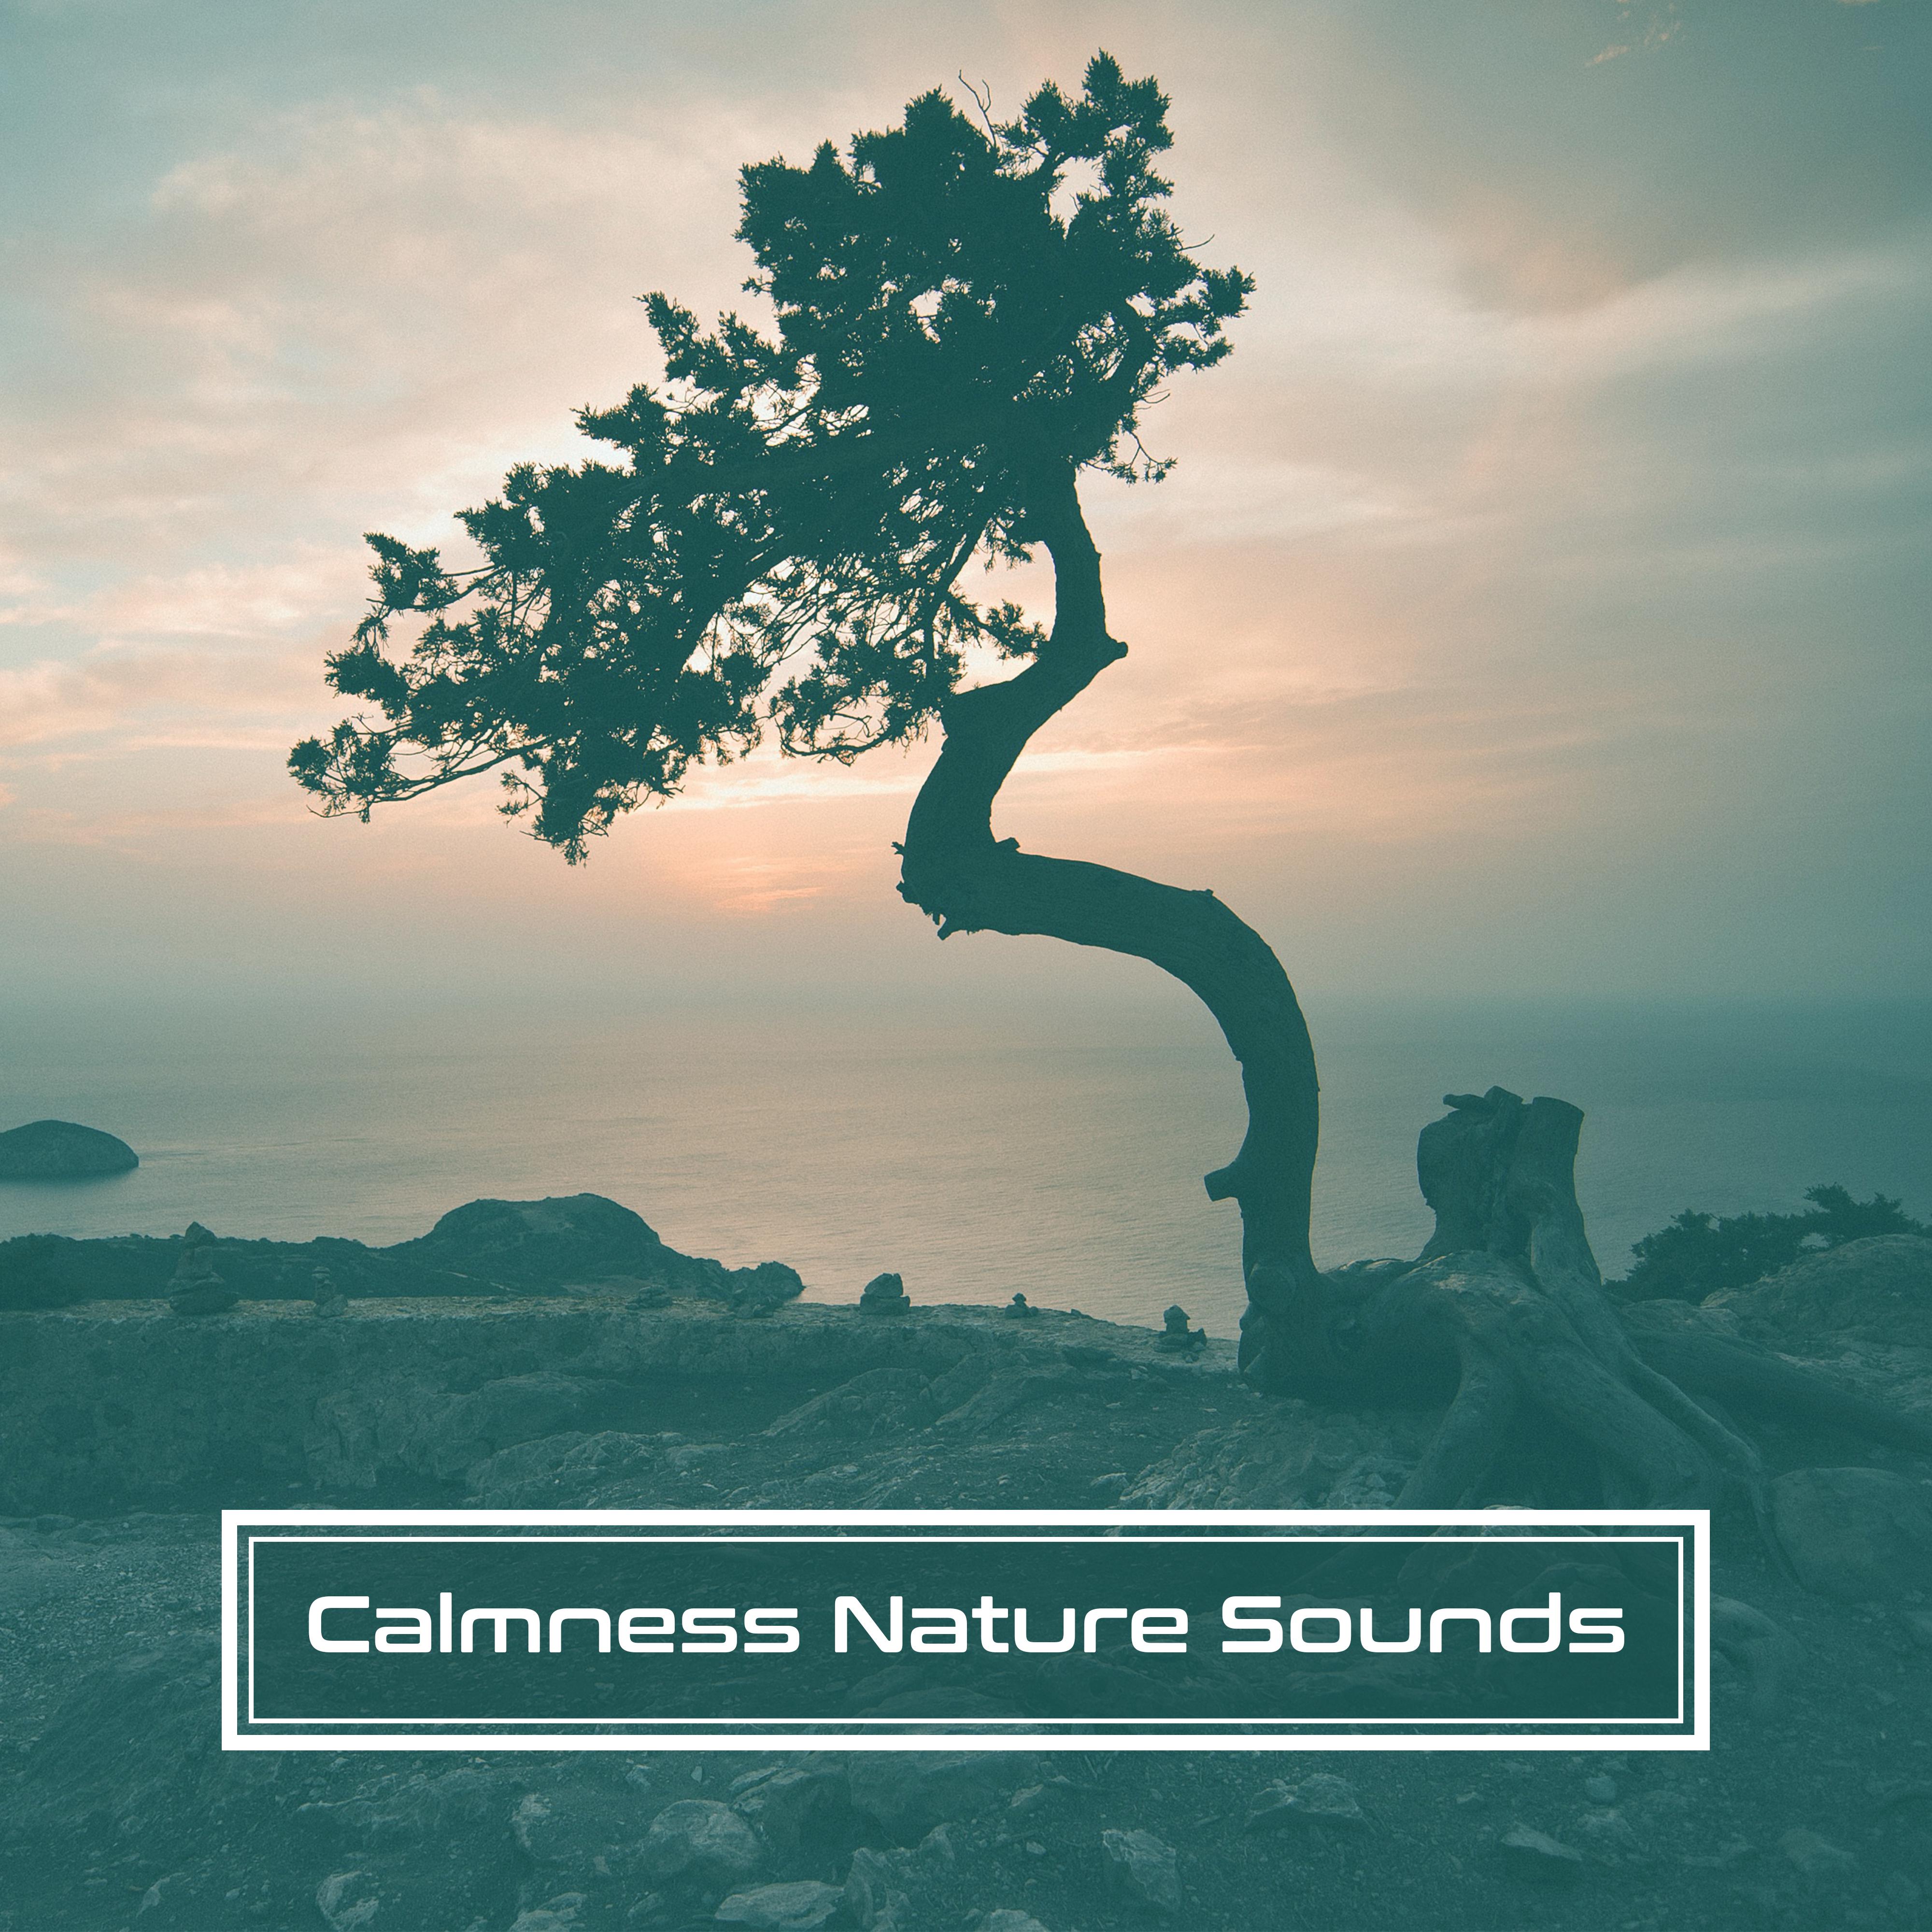 Calmness Nature Sounds – Music to Relax, Rest with New Age Sounds, Healing Waves, Soothing Wind Blows